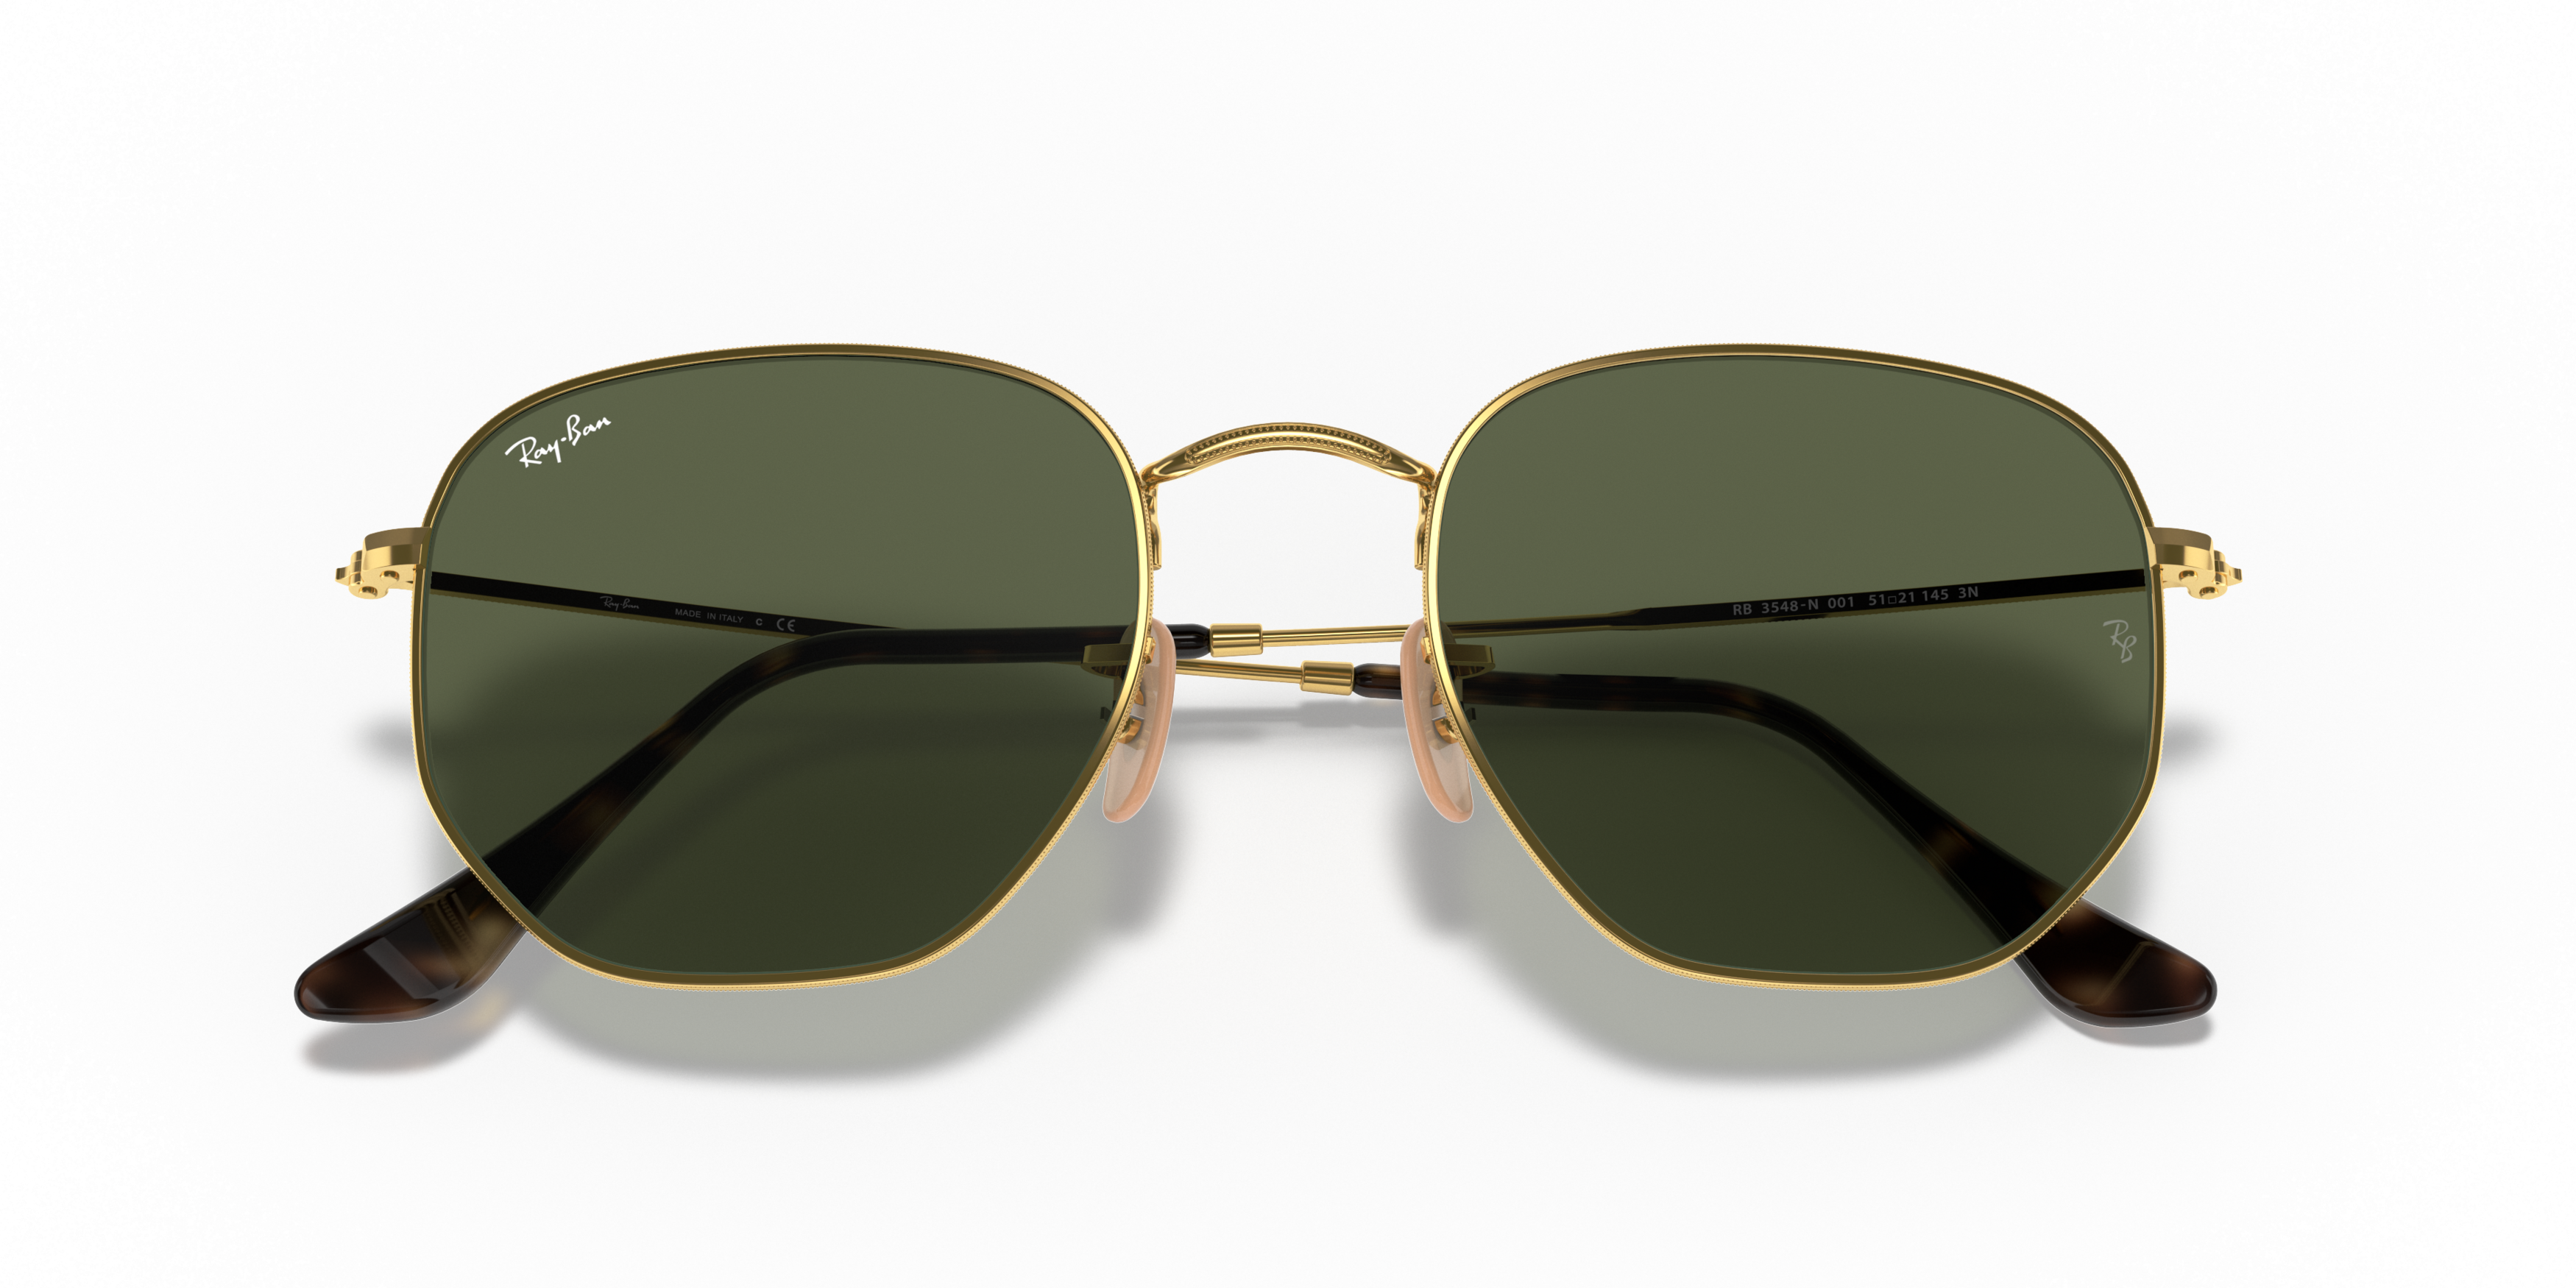 [products.image.folded] RAY-BAN RB3548N 1